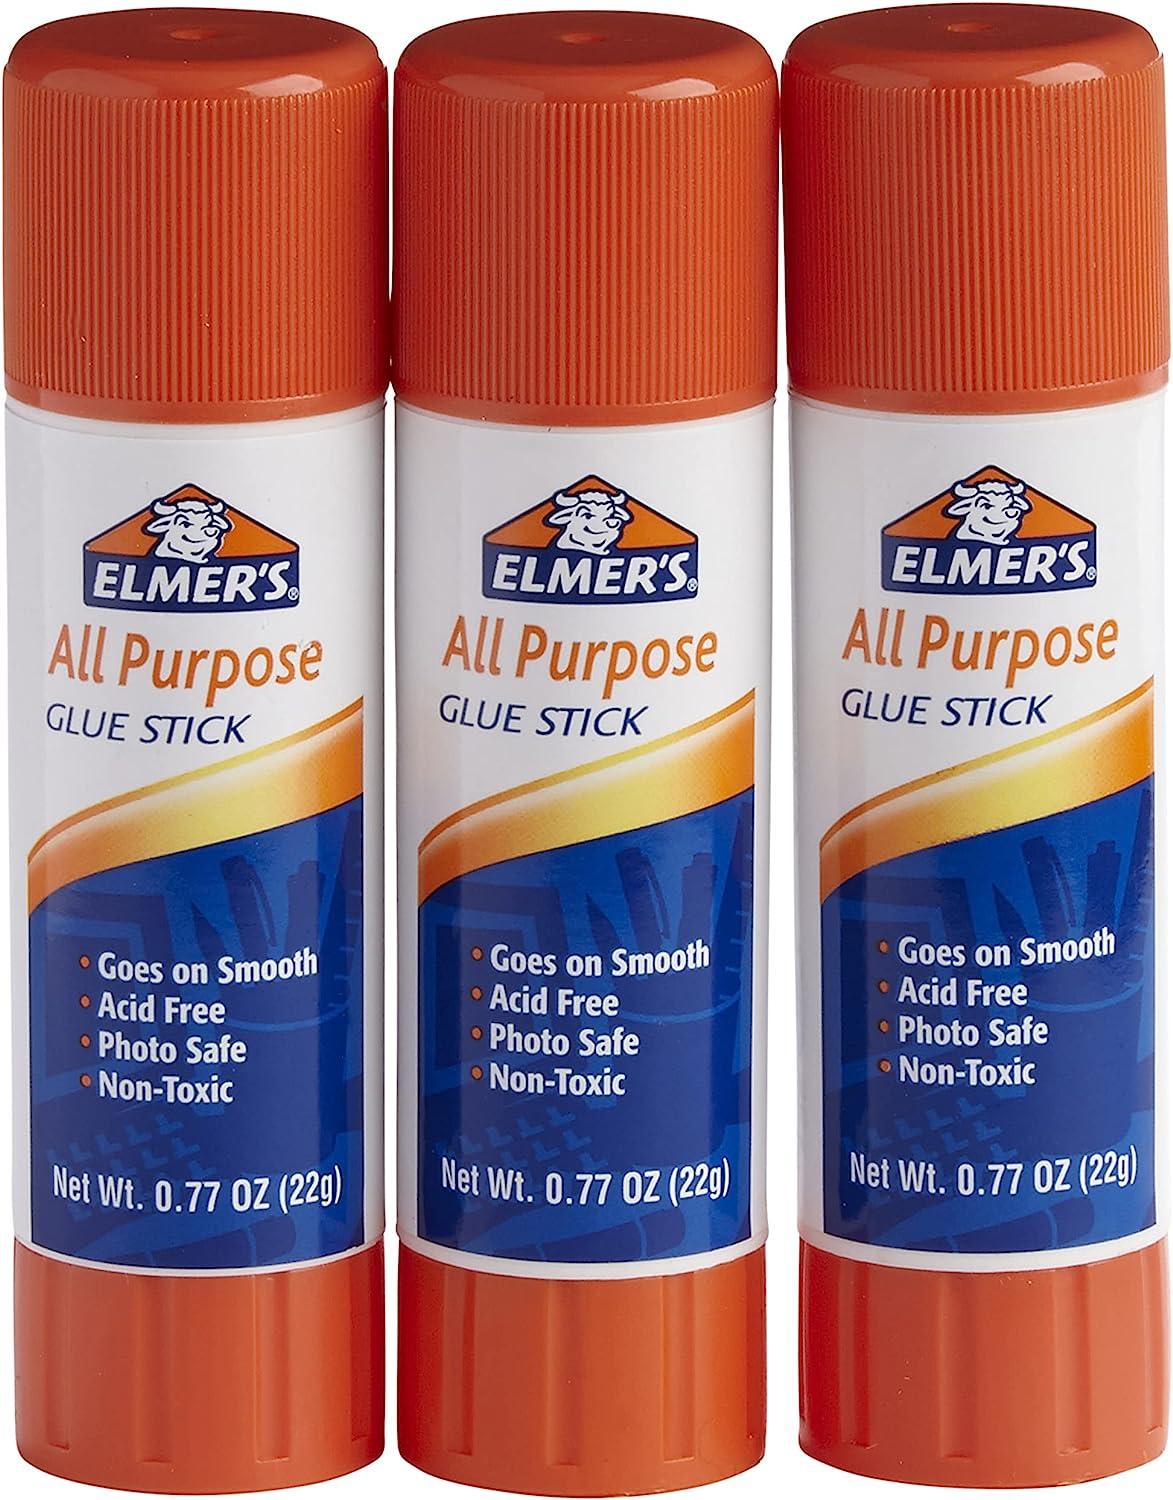 Elmer's Disappearing Purple School Glue Sticks, Washable, 7 Grams, 30 Count